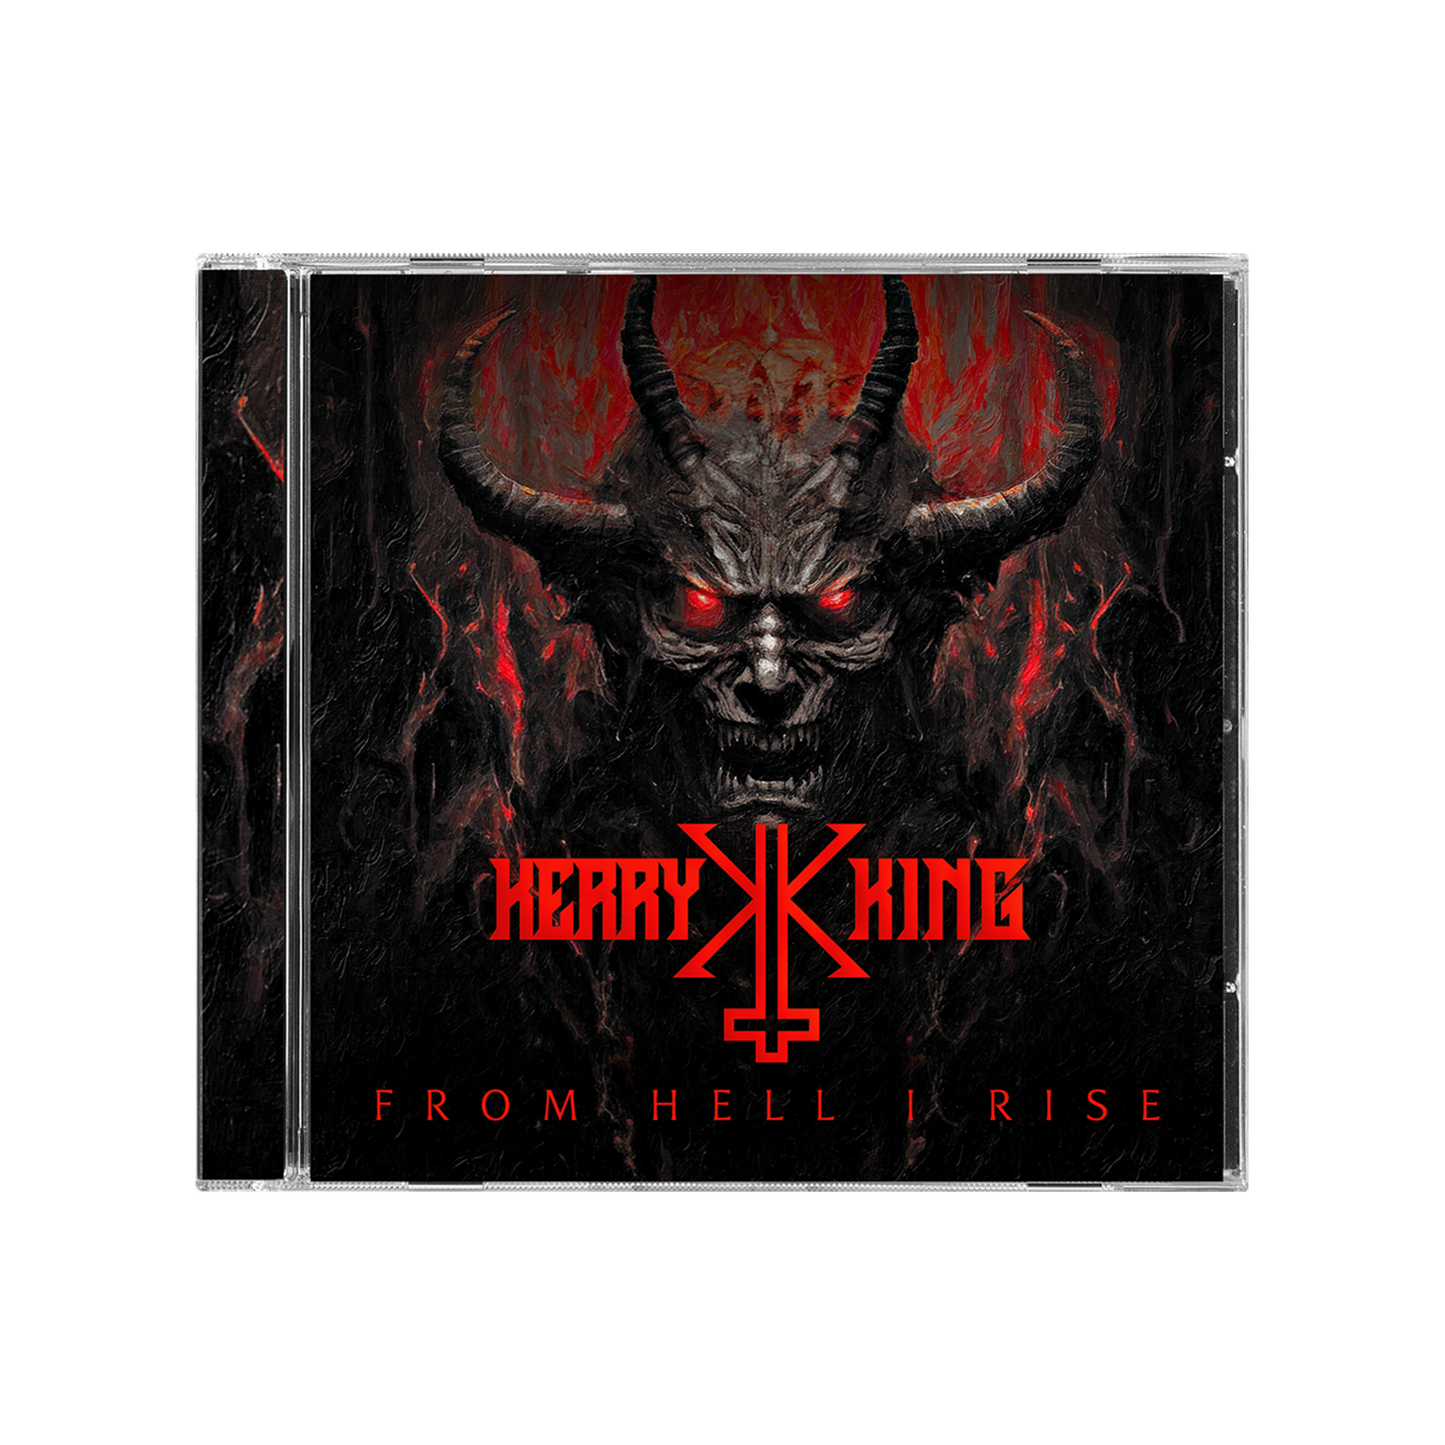 From Hell I Rise - Jewelcase CD